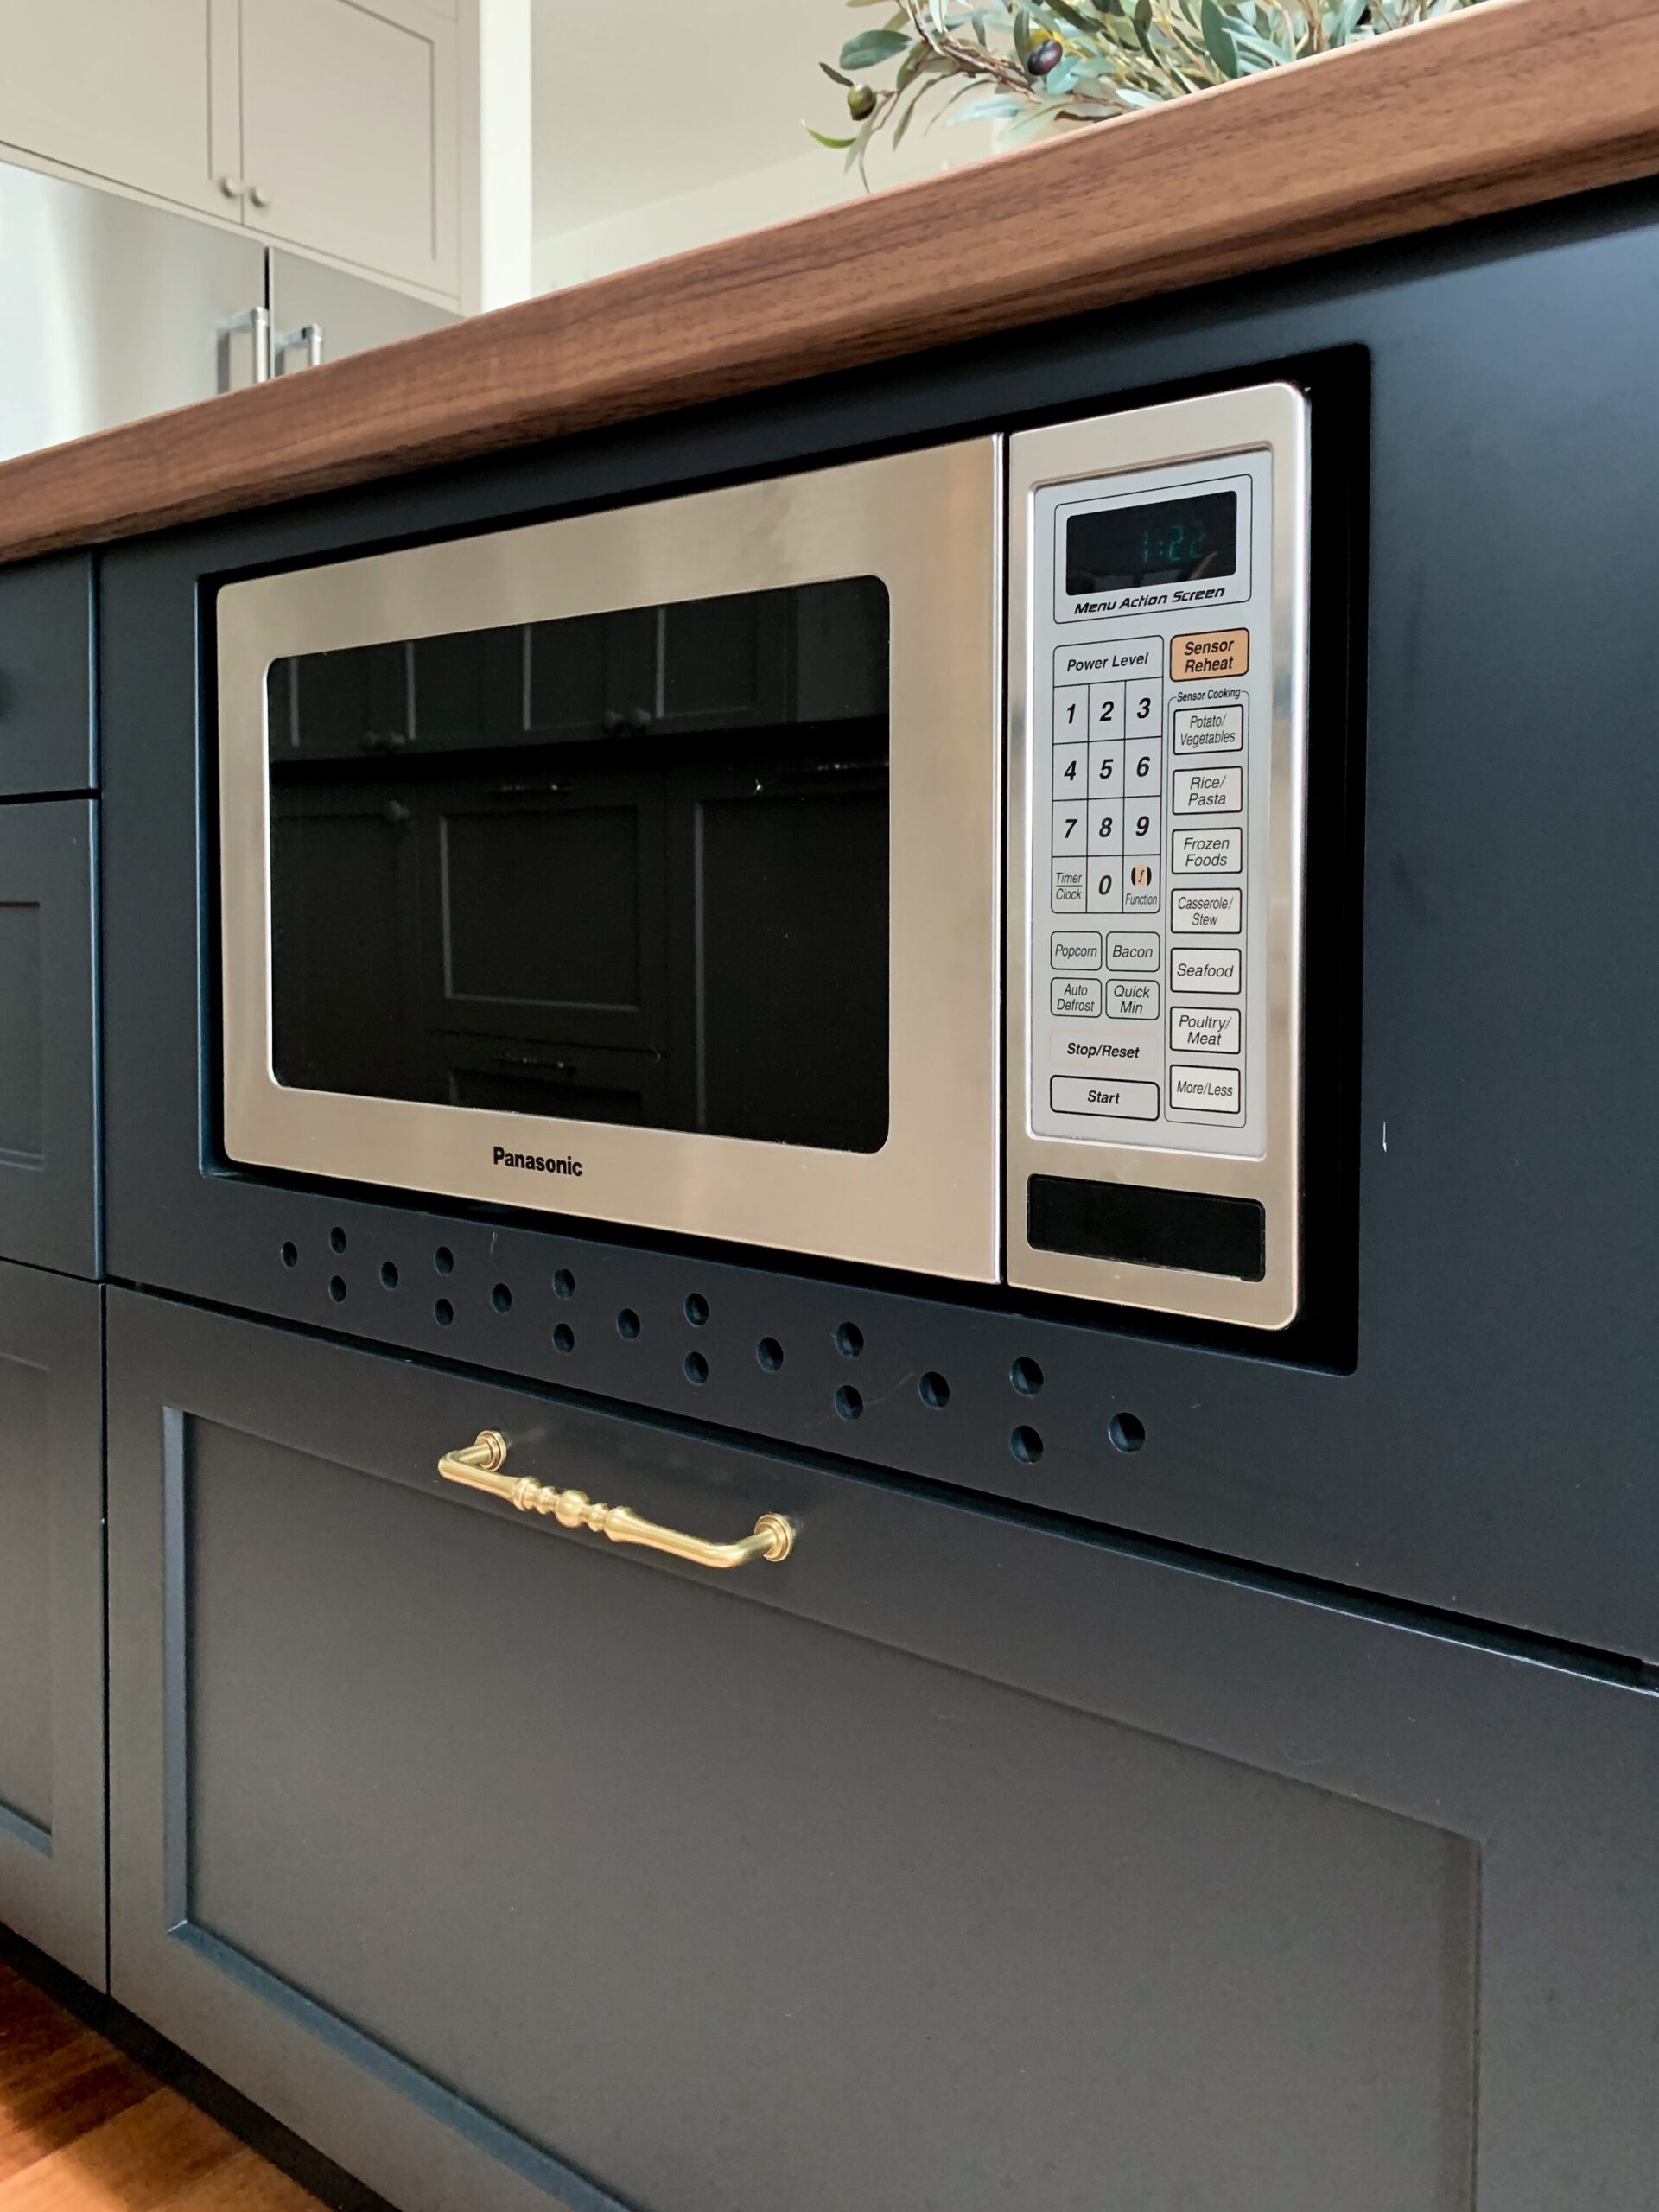 Microwave with custom vent cover with small vent holes in black island under countertop